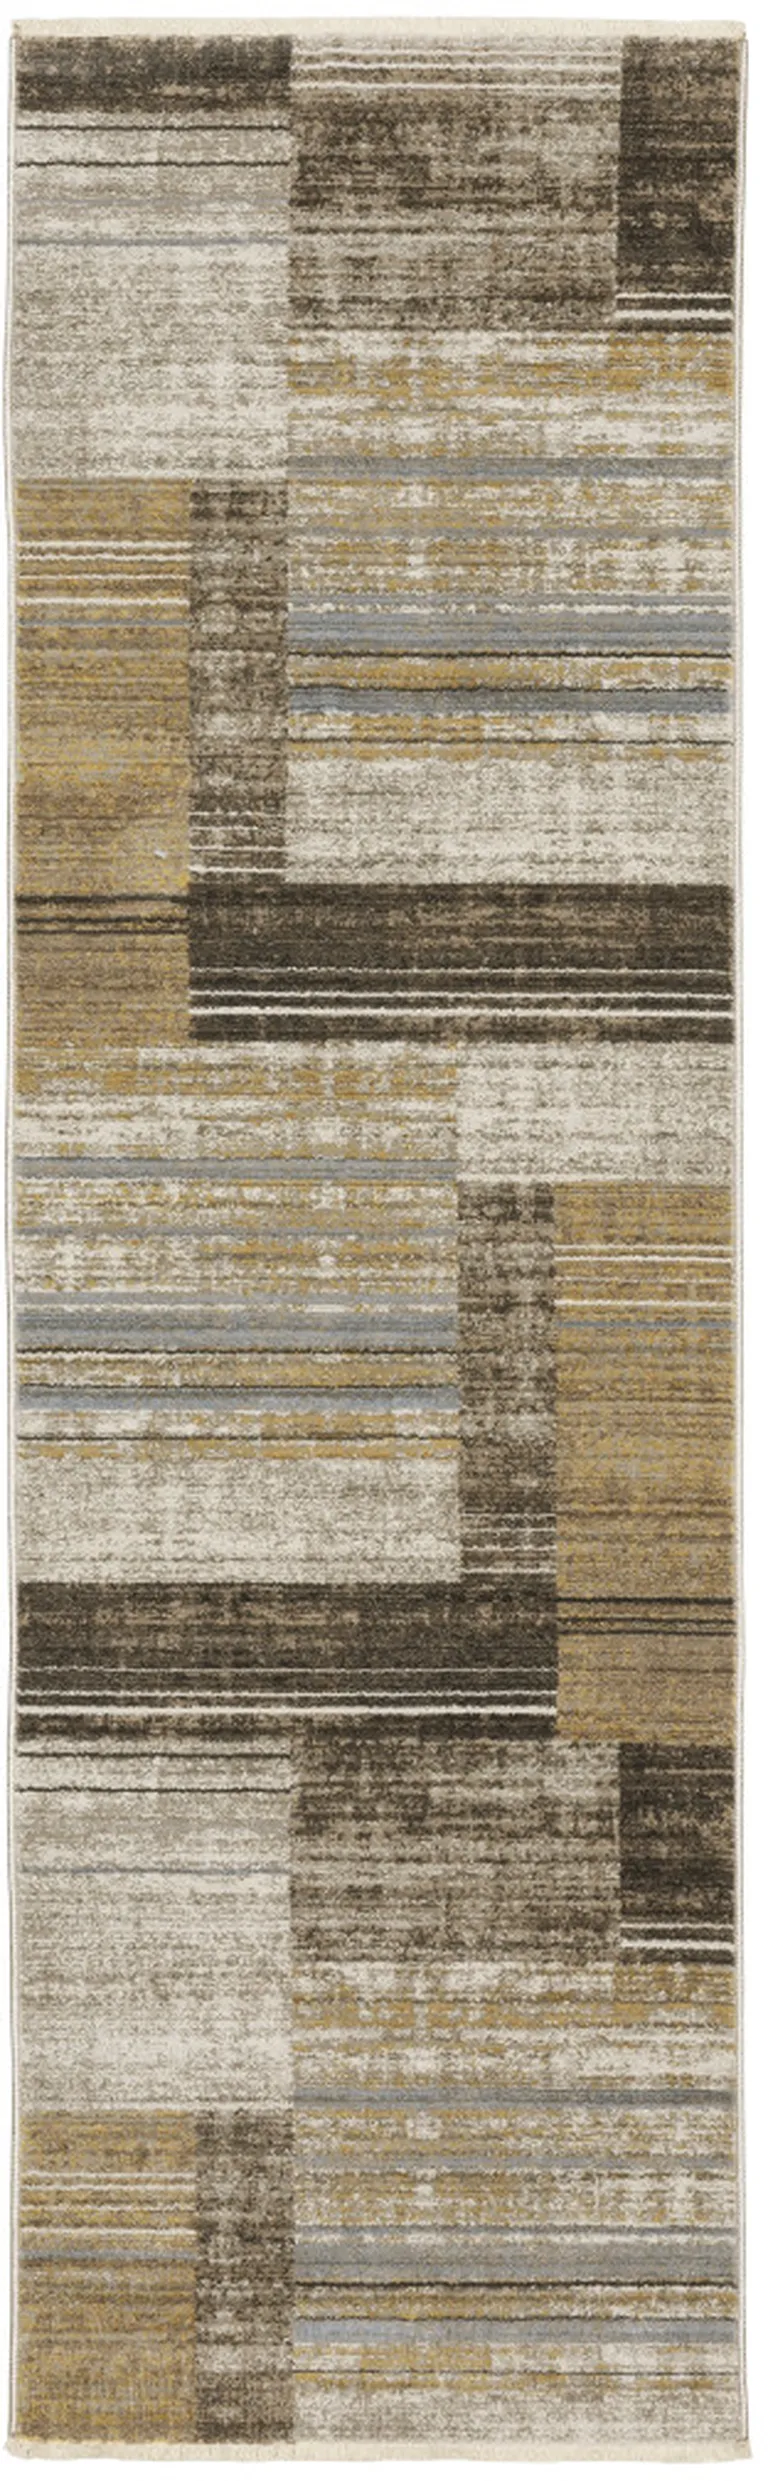 8' Beige Charcoal Brown Grey Tan Gold And Blue Geometric Power Loom Runner Rug With Fringe Photo 1